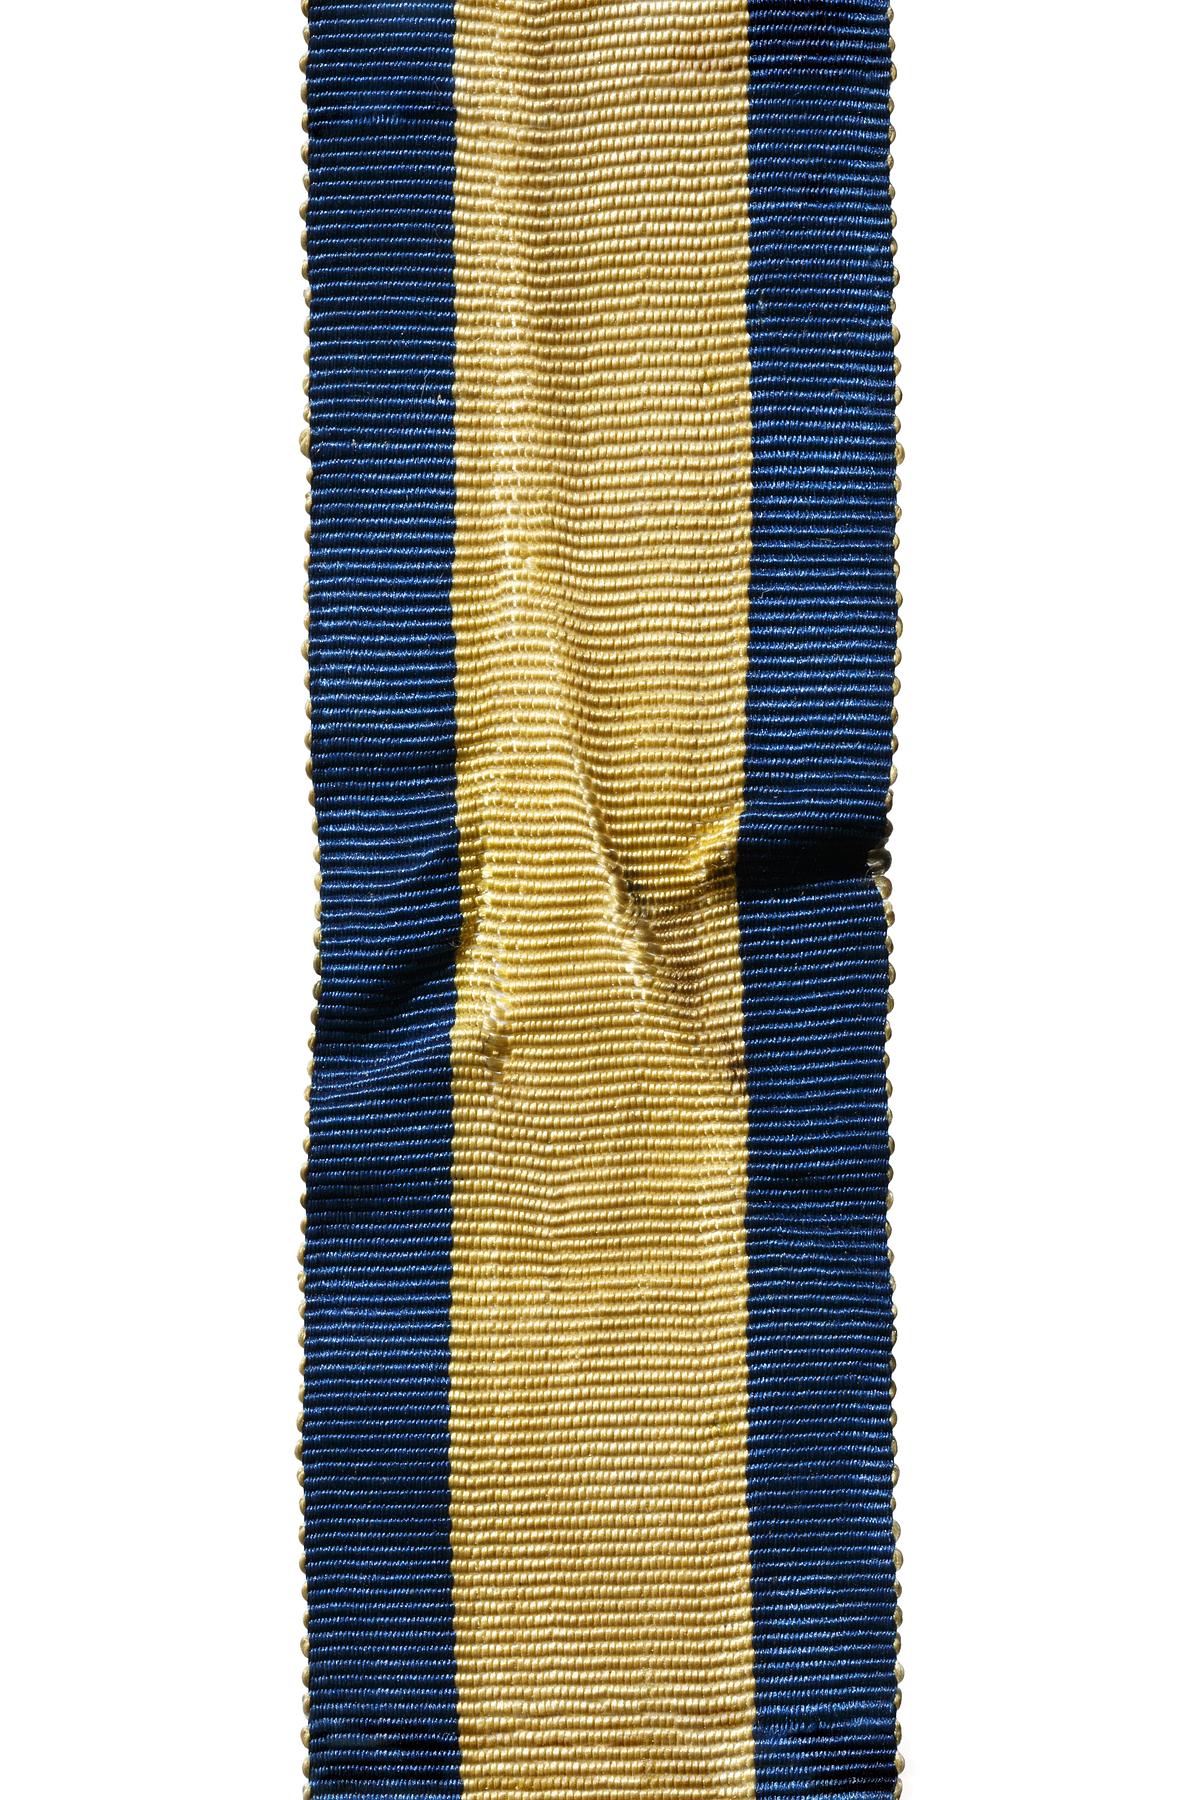 Unidentified ribbon for an order, N34